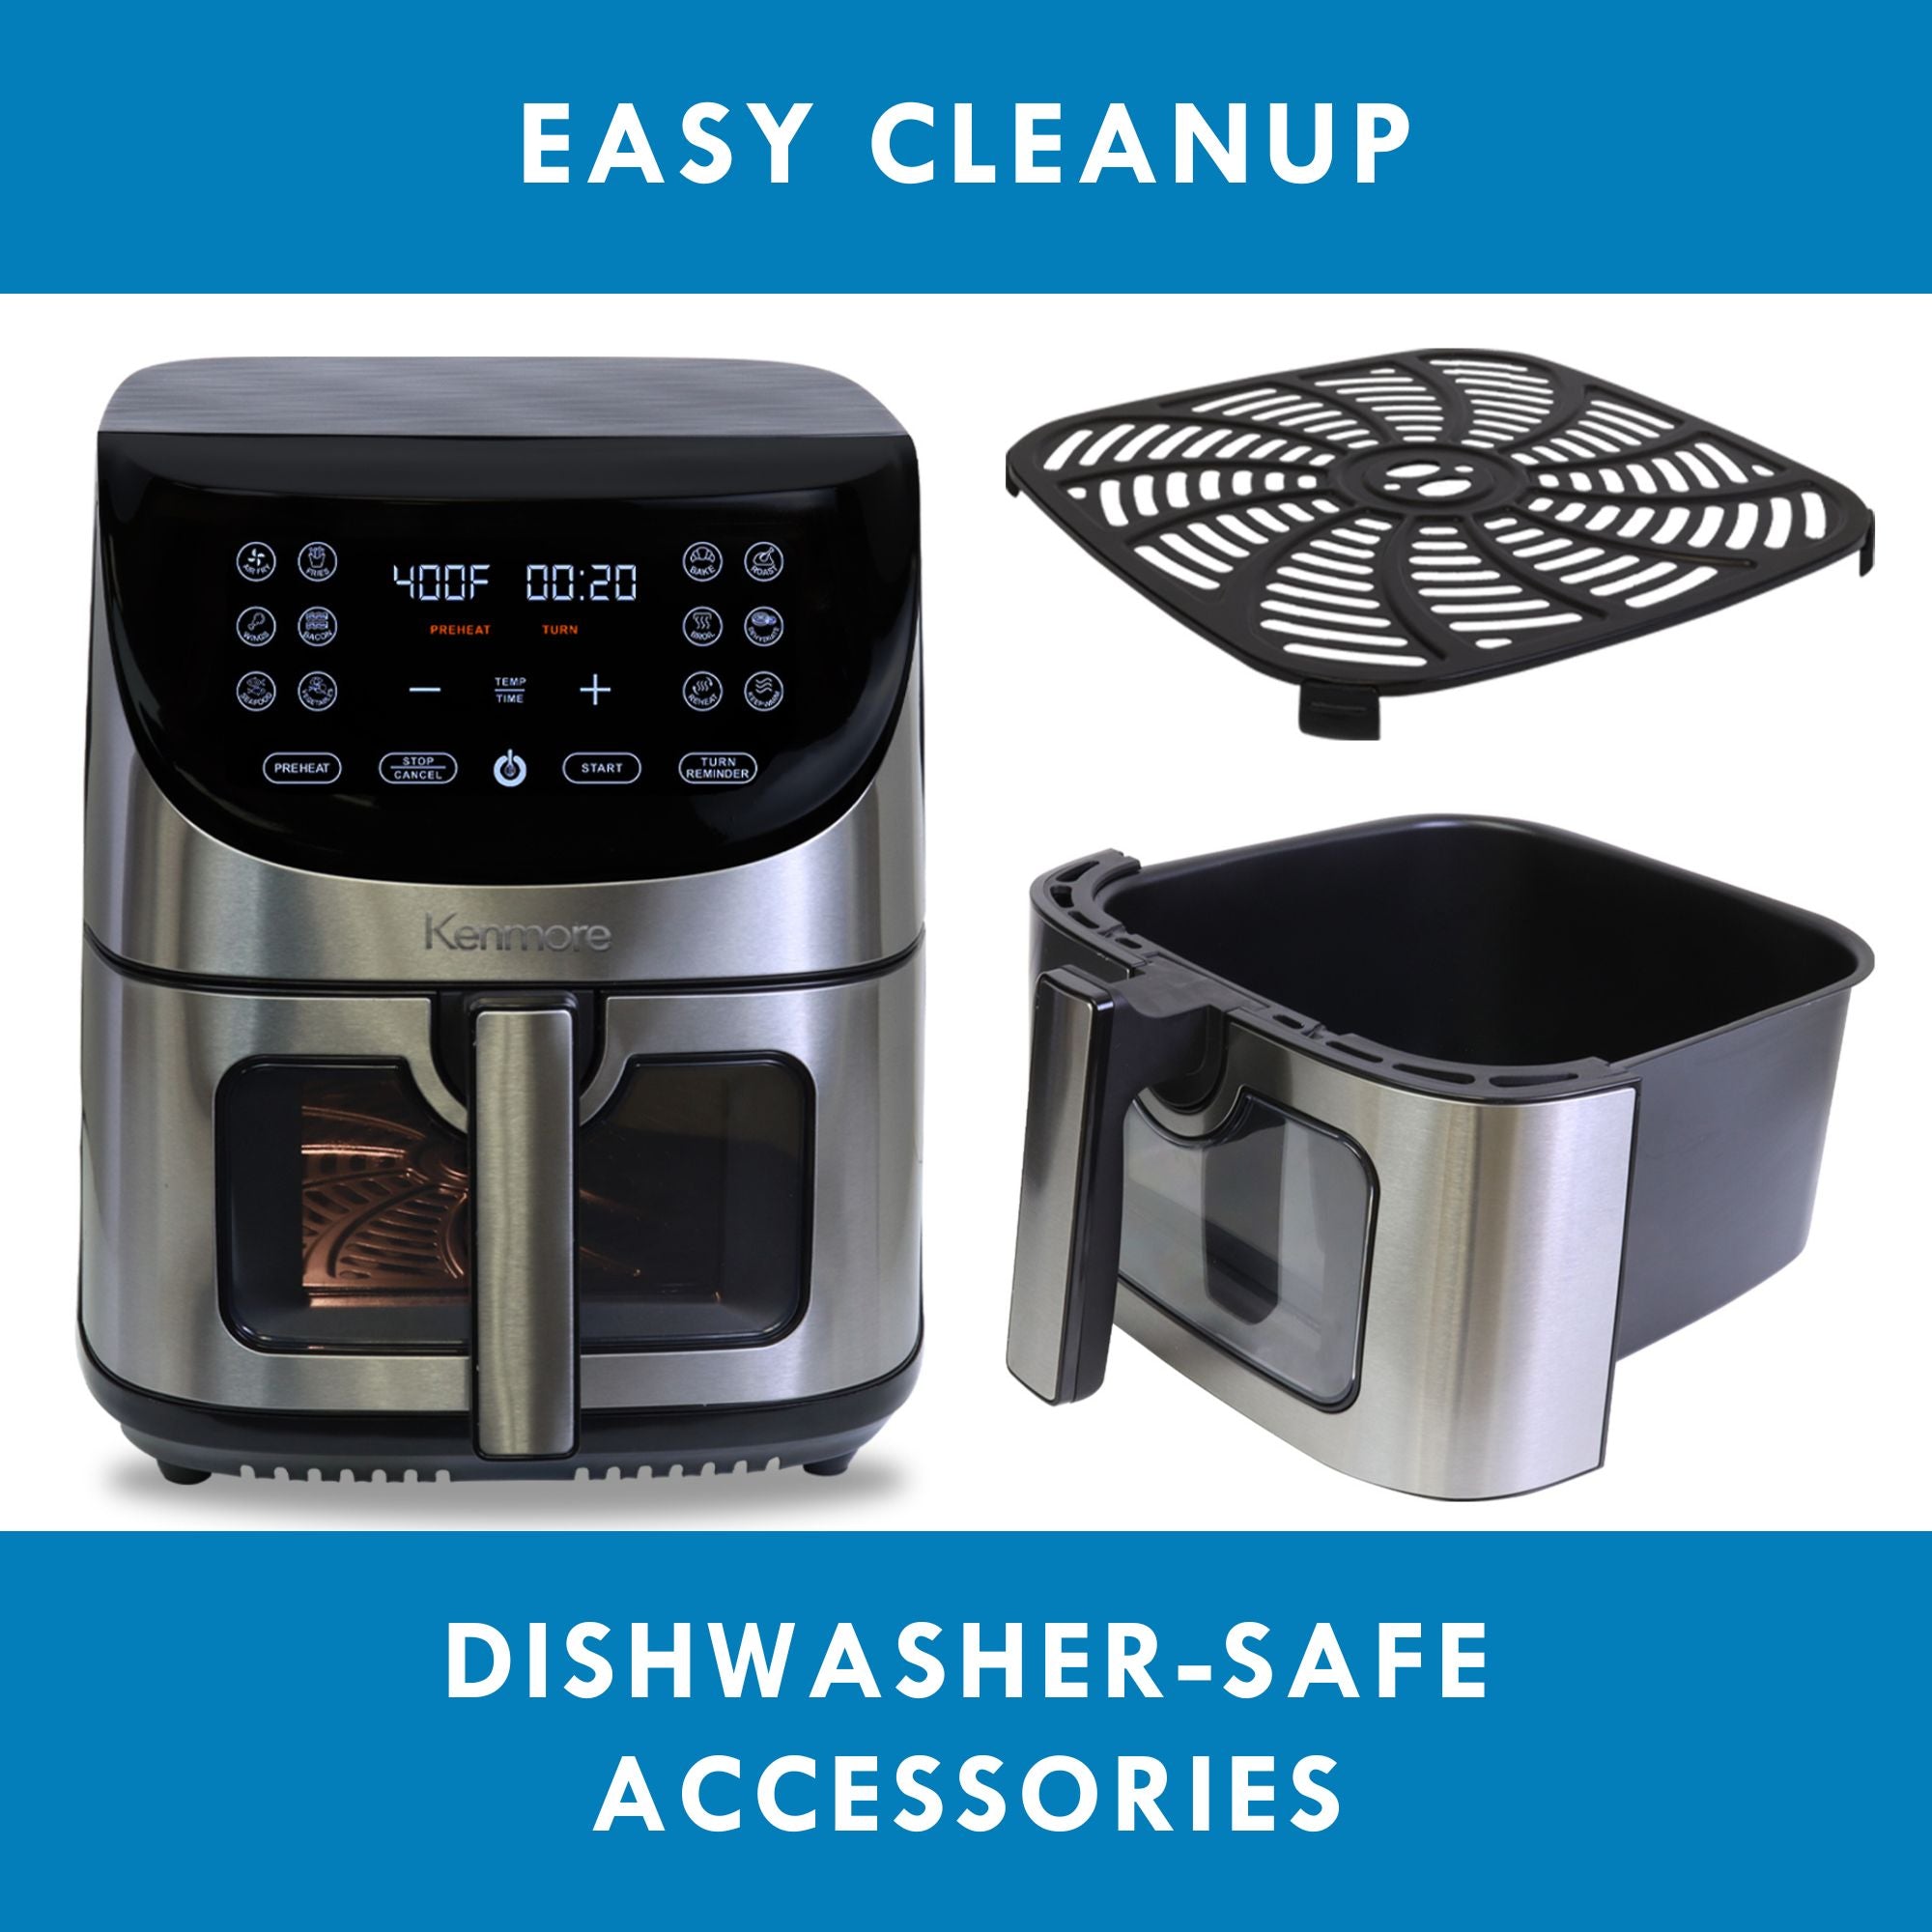 Kenmore stainless steel digital air fryer with basket pulled out and non-stick grill plate removed. Text above reads, "Easy cleanup," and text below reads, "Dishwasher-safe accessories."